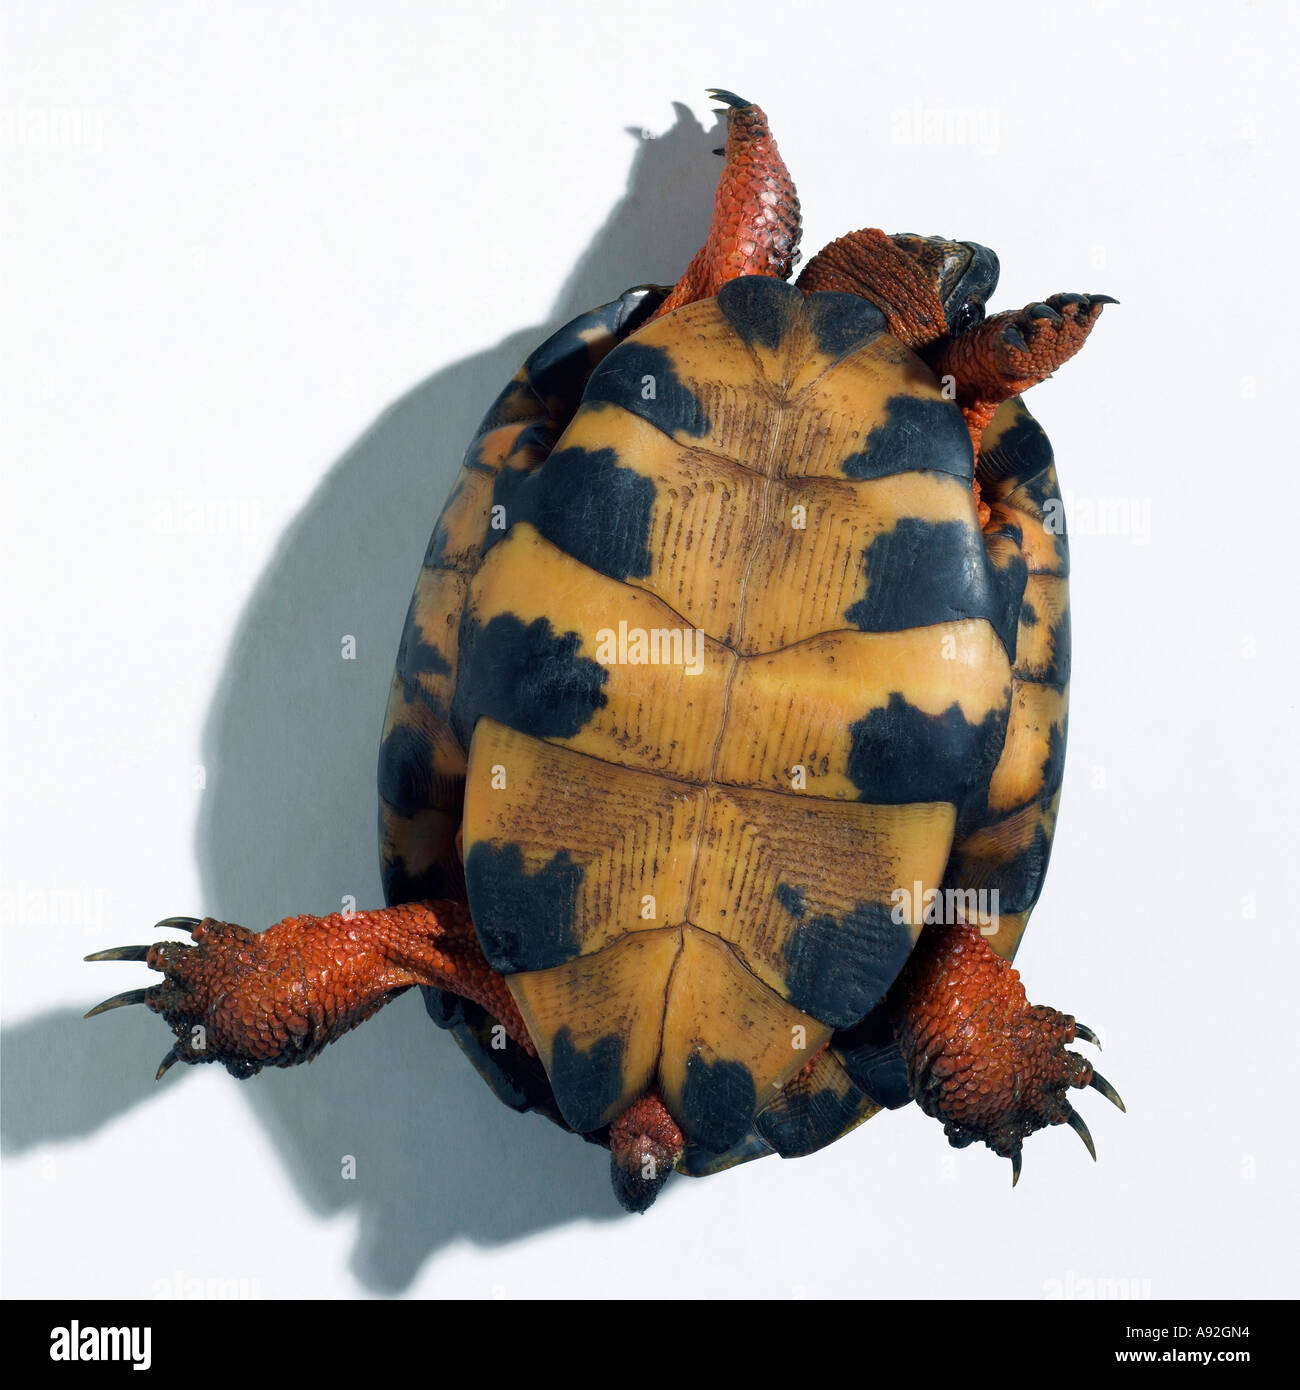 Close-up of a tortoise upside down Stock Photo